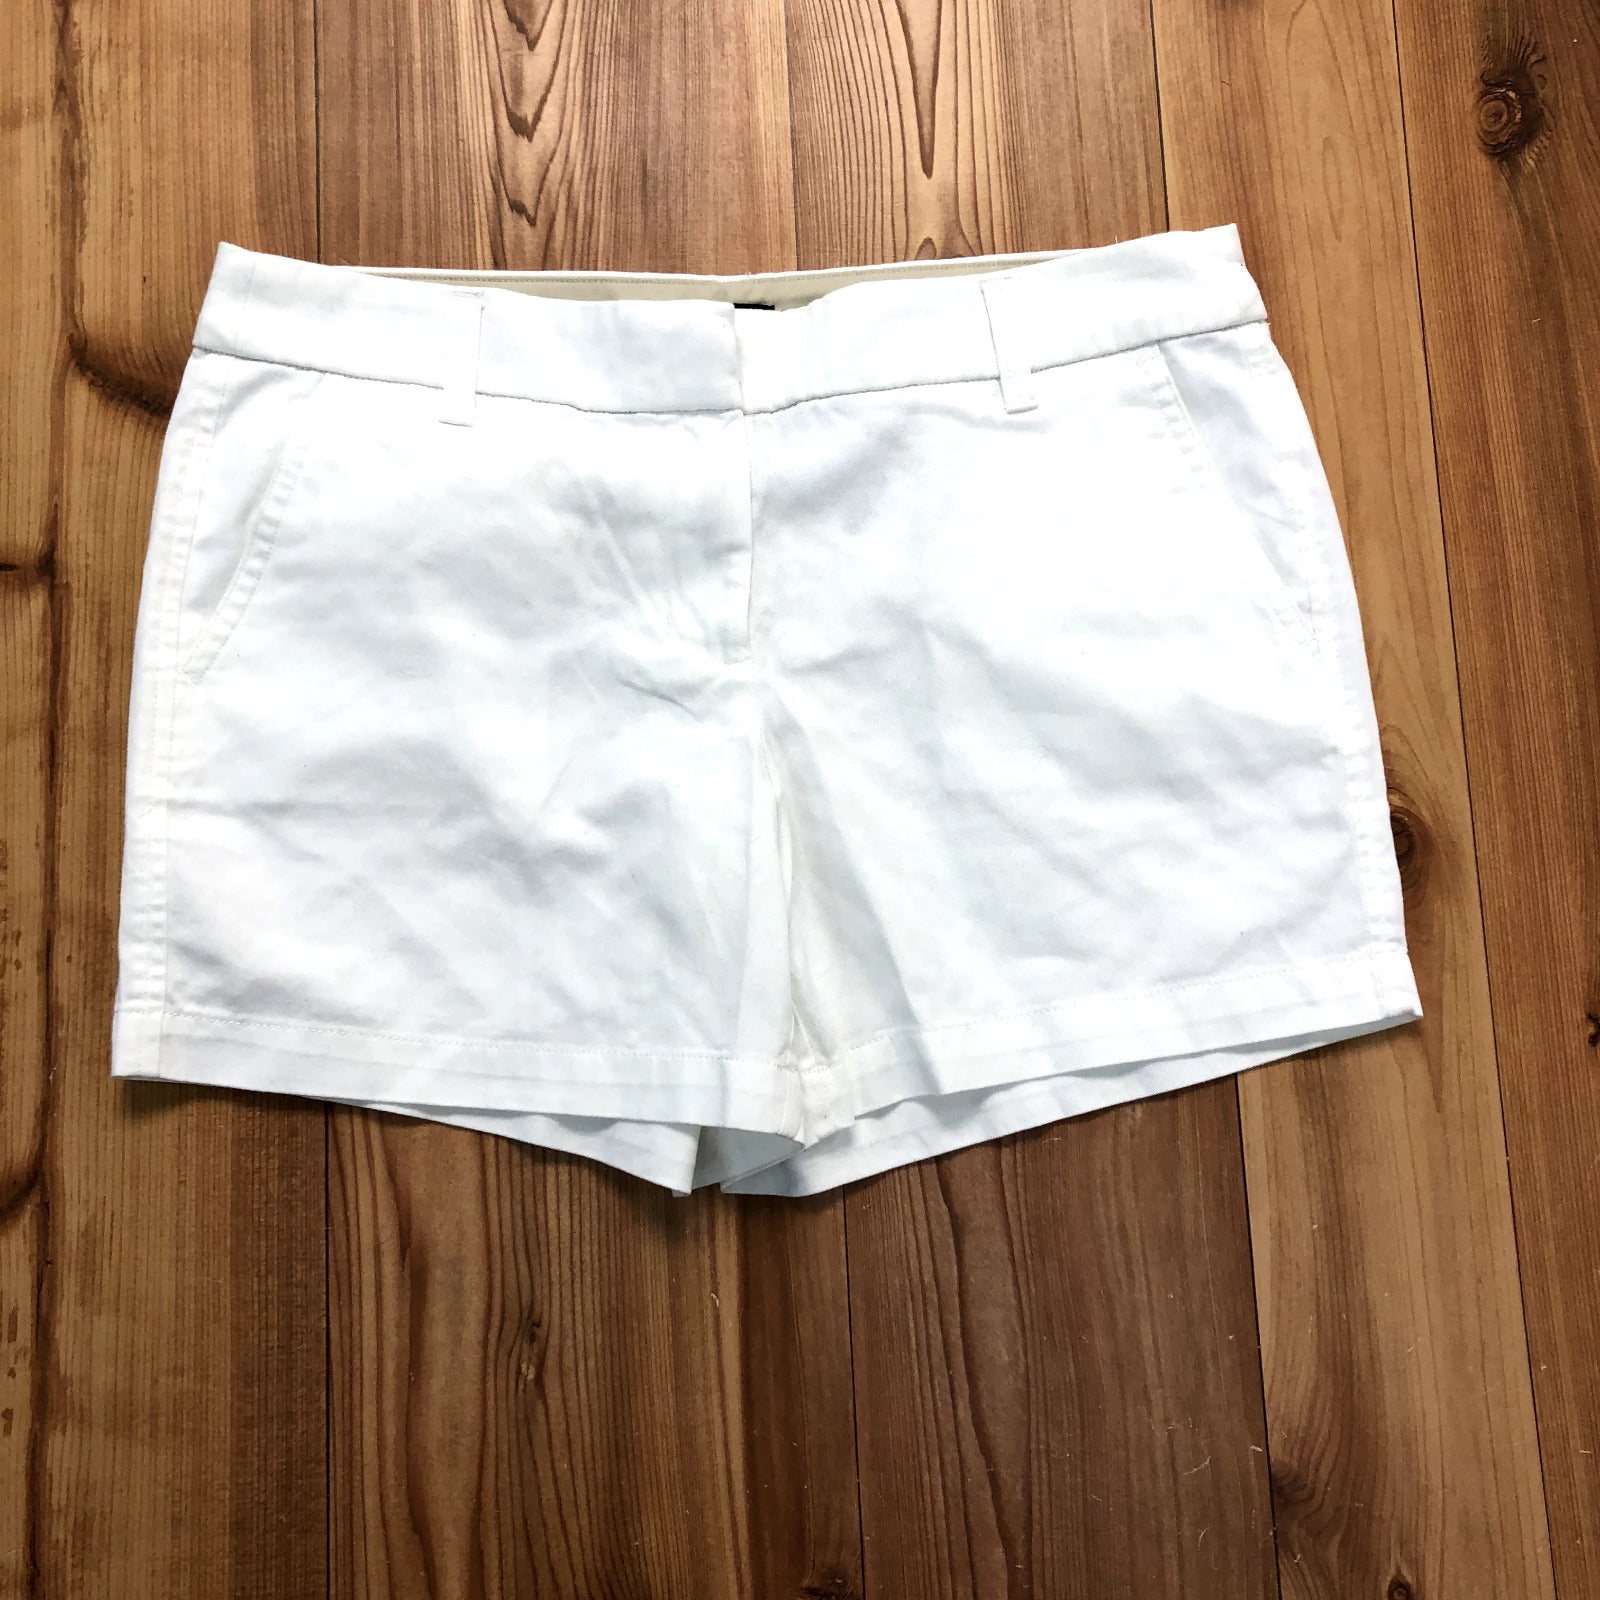 NEW J.Crew White Flat Front Chino Solid Regular Fit Shorts Women's Size 6